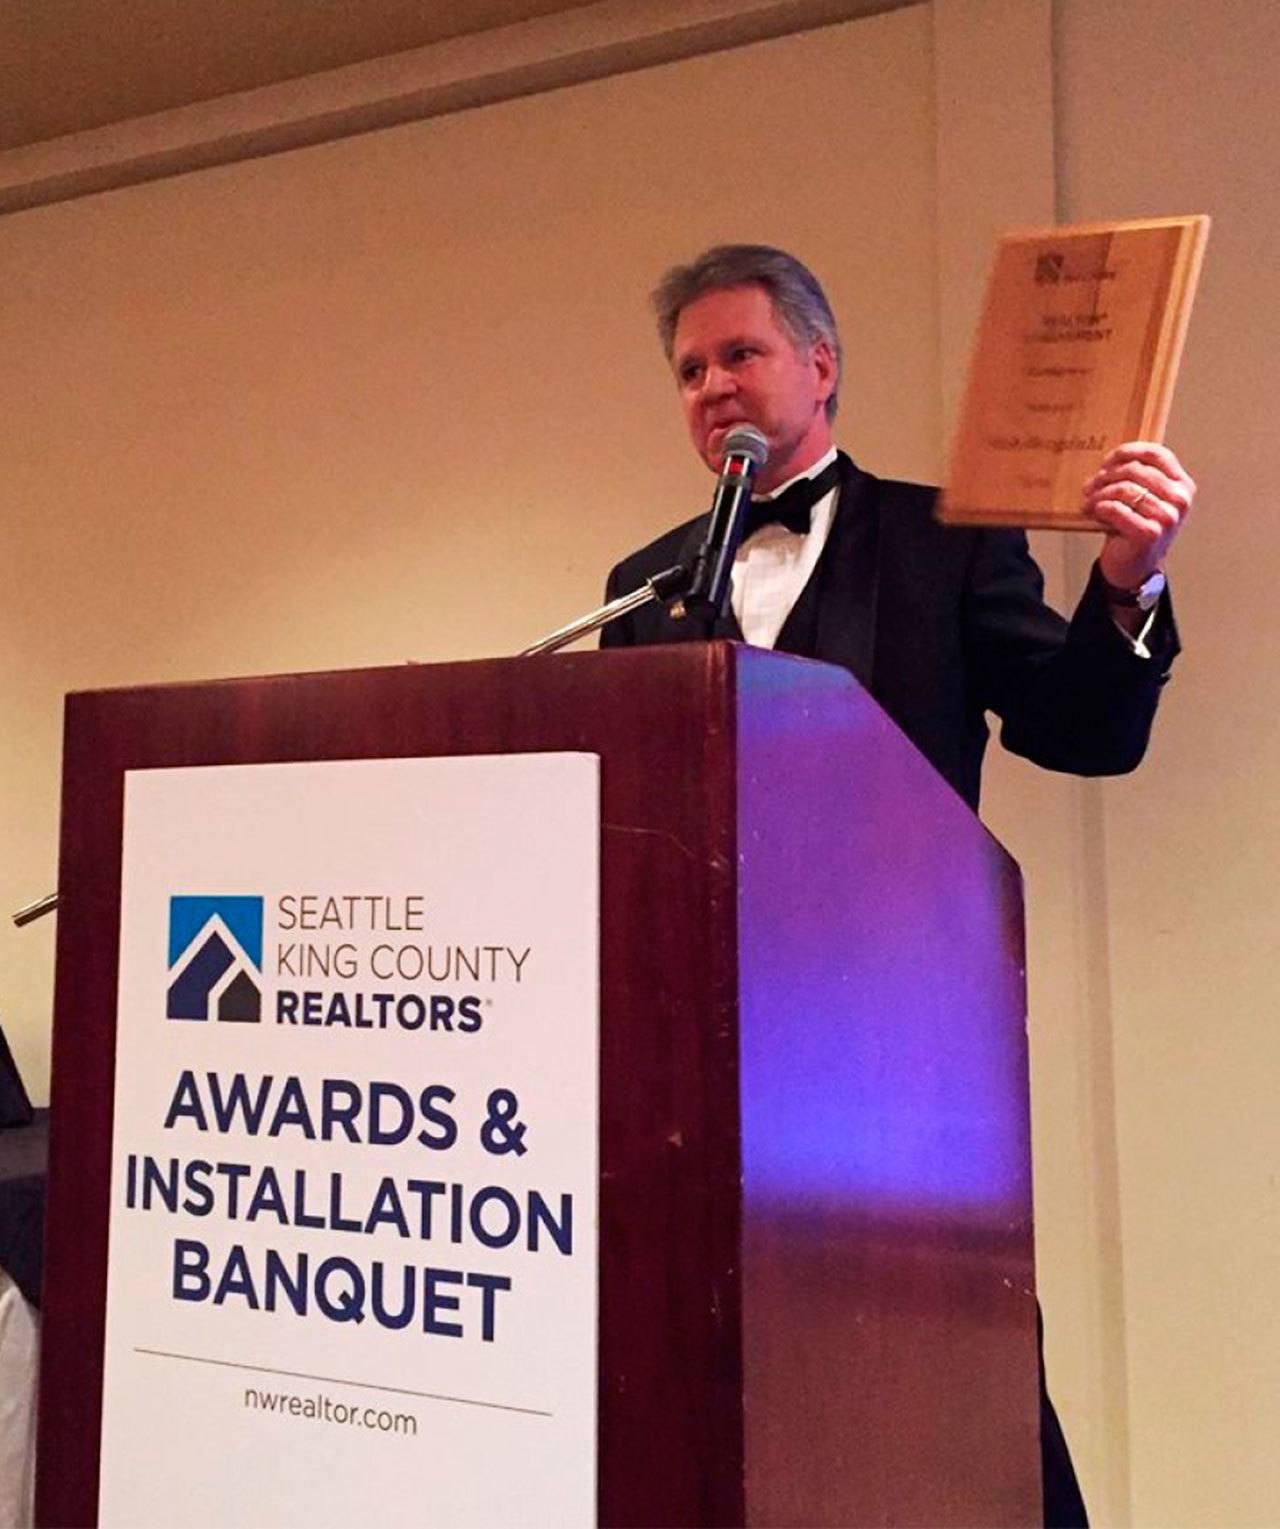 Kirkland resident Rich Bergdahl was among 11 individuals singled out for special honors at the 2016 Installation and Awards Banquet of the Seattle King County Realtors. Contributed photo